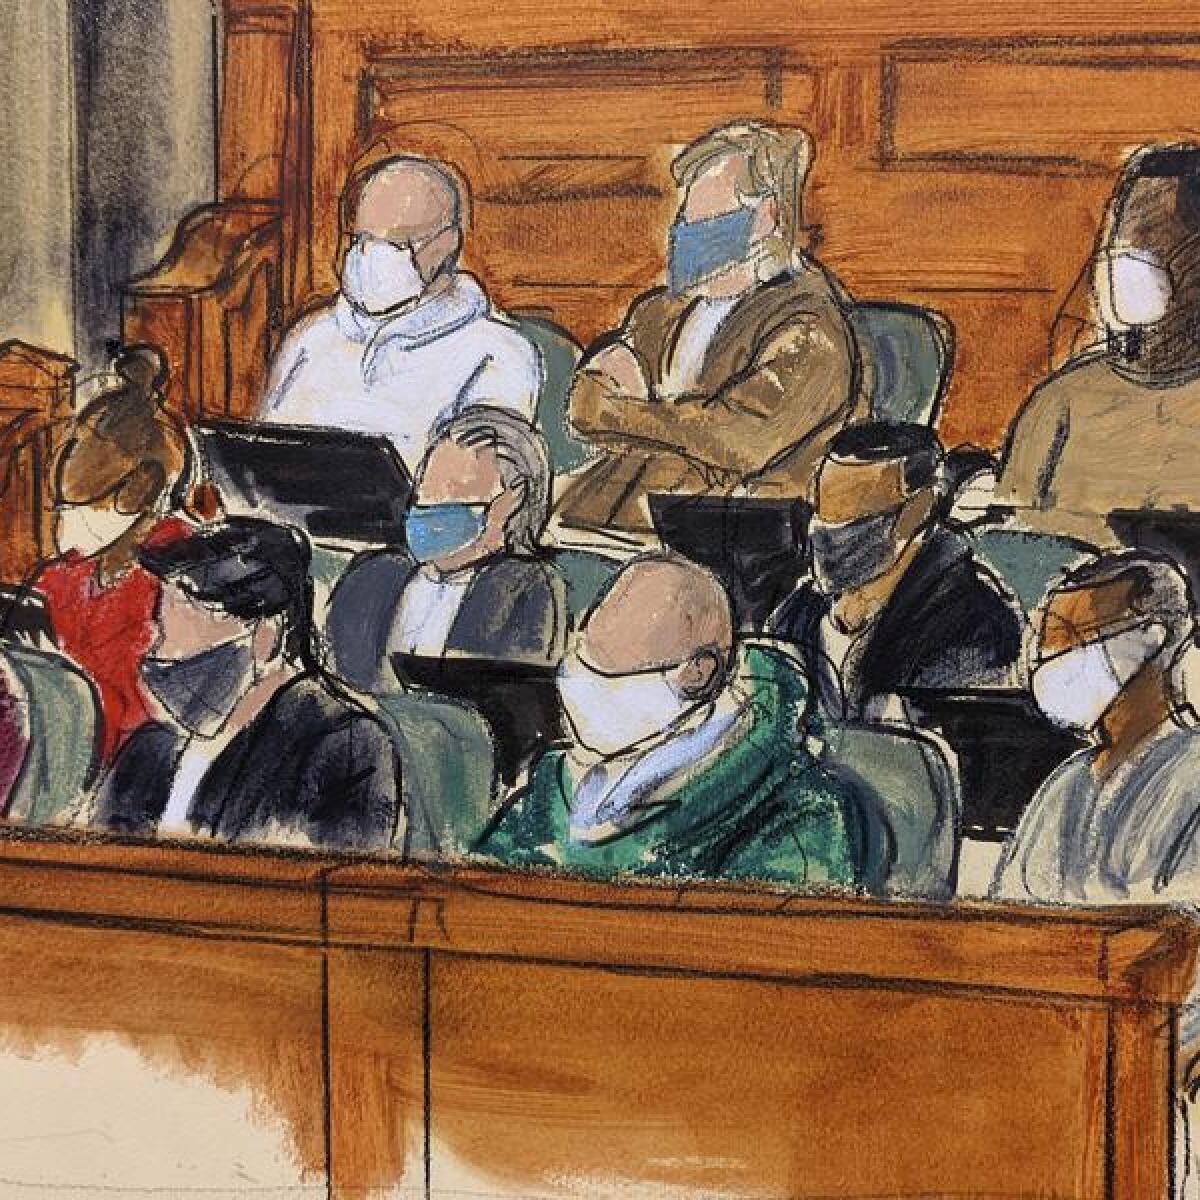 The jury in the trial of Ghislaine Maxwell.